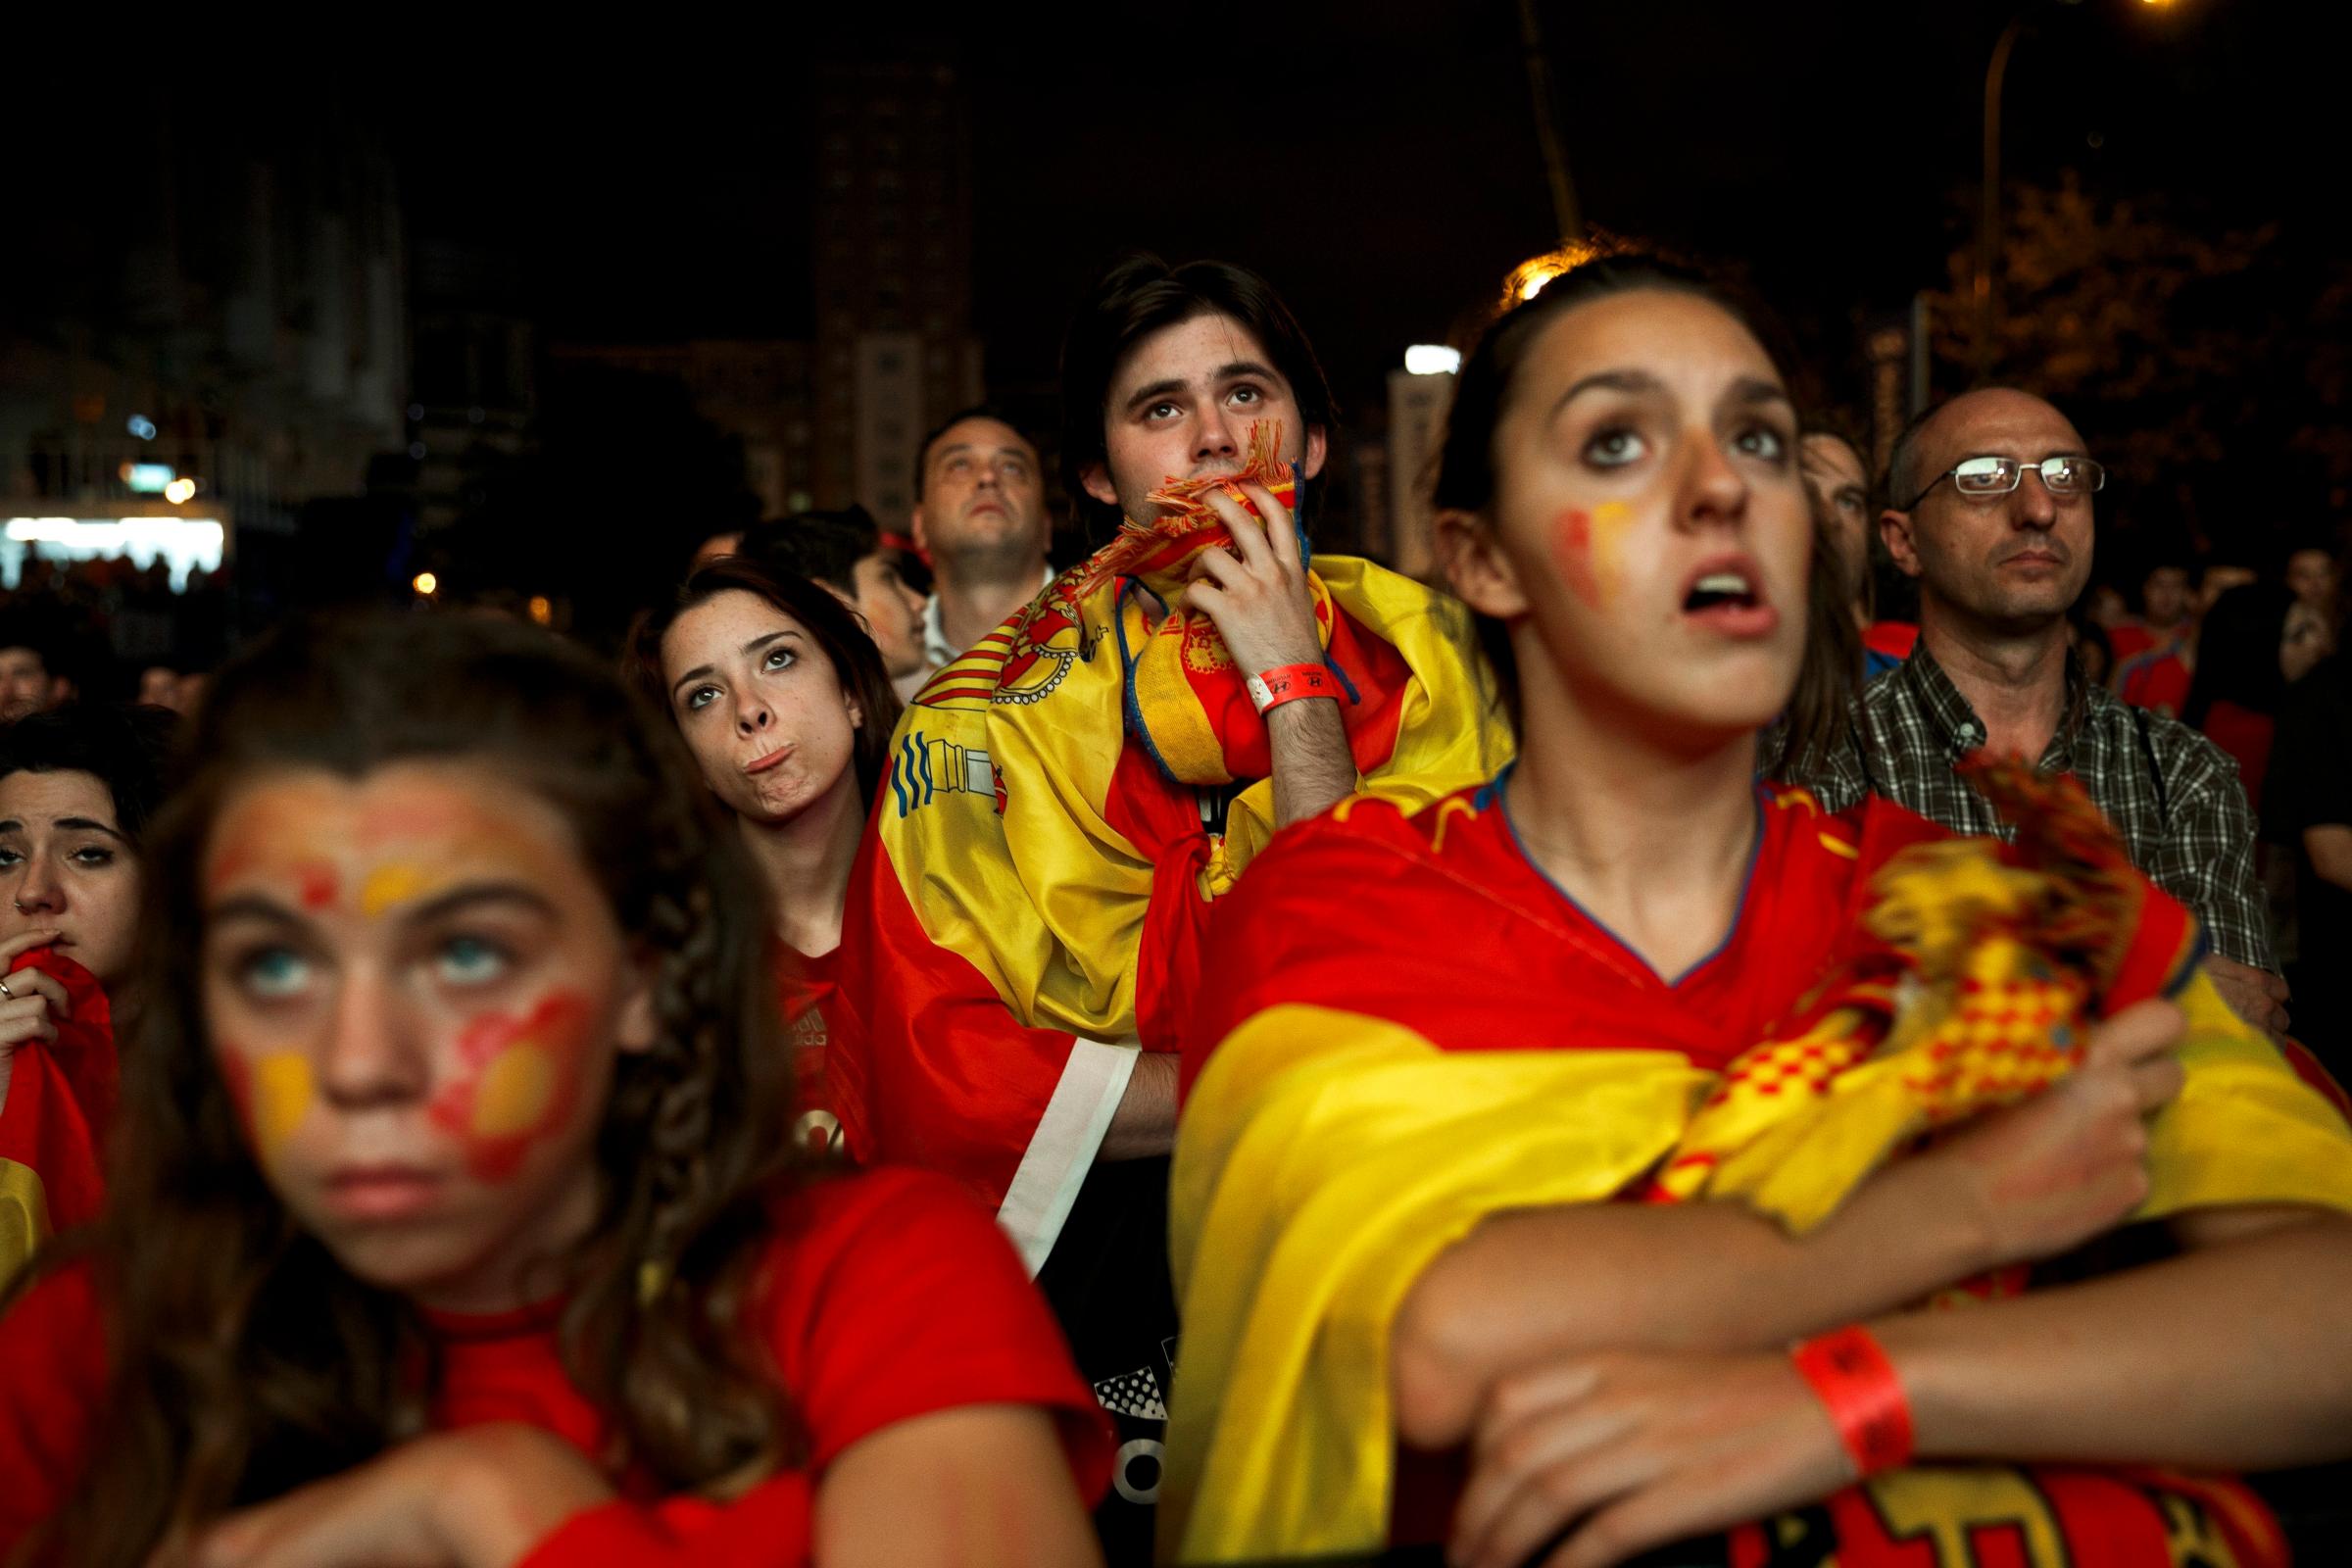 Spanish soccer fans react while watching the soccer game between Spain and the Netherlands in Madrid on June 13, 2014.